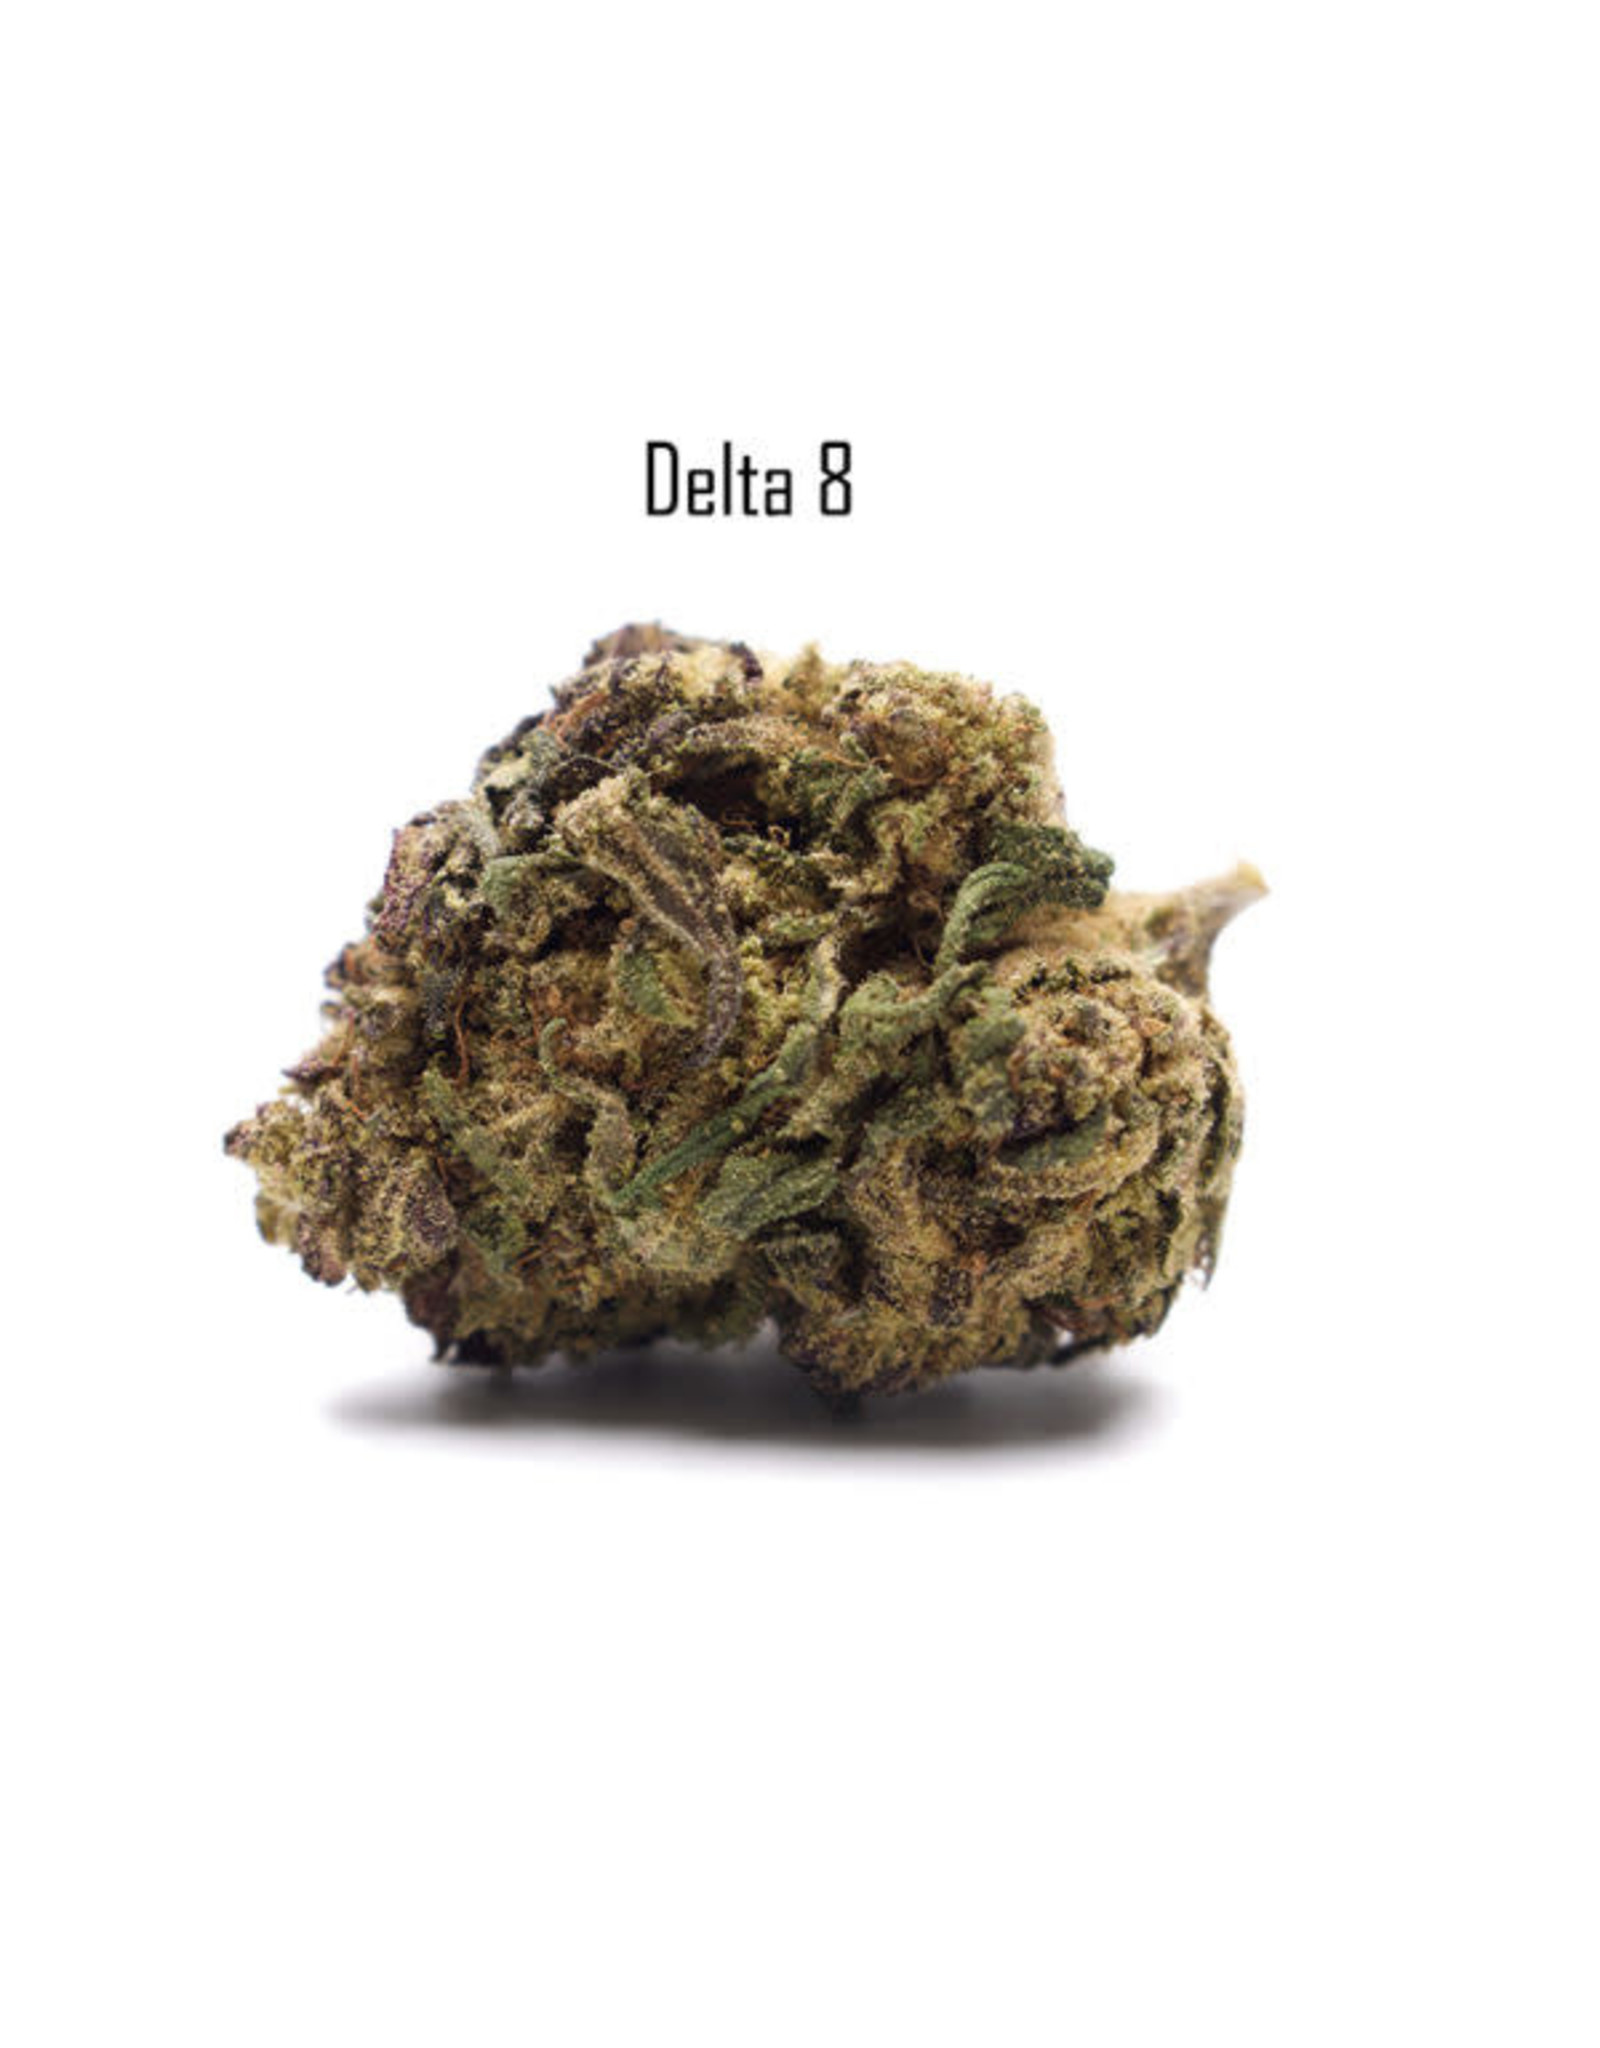 A Distribution Company Sour space Candy Delta 8 Flower